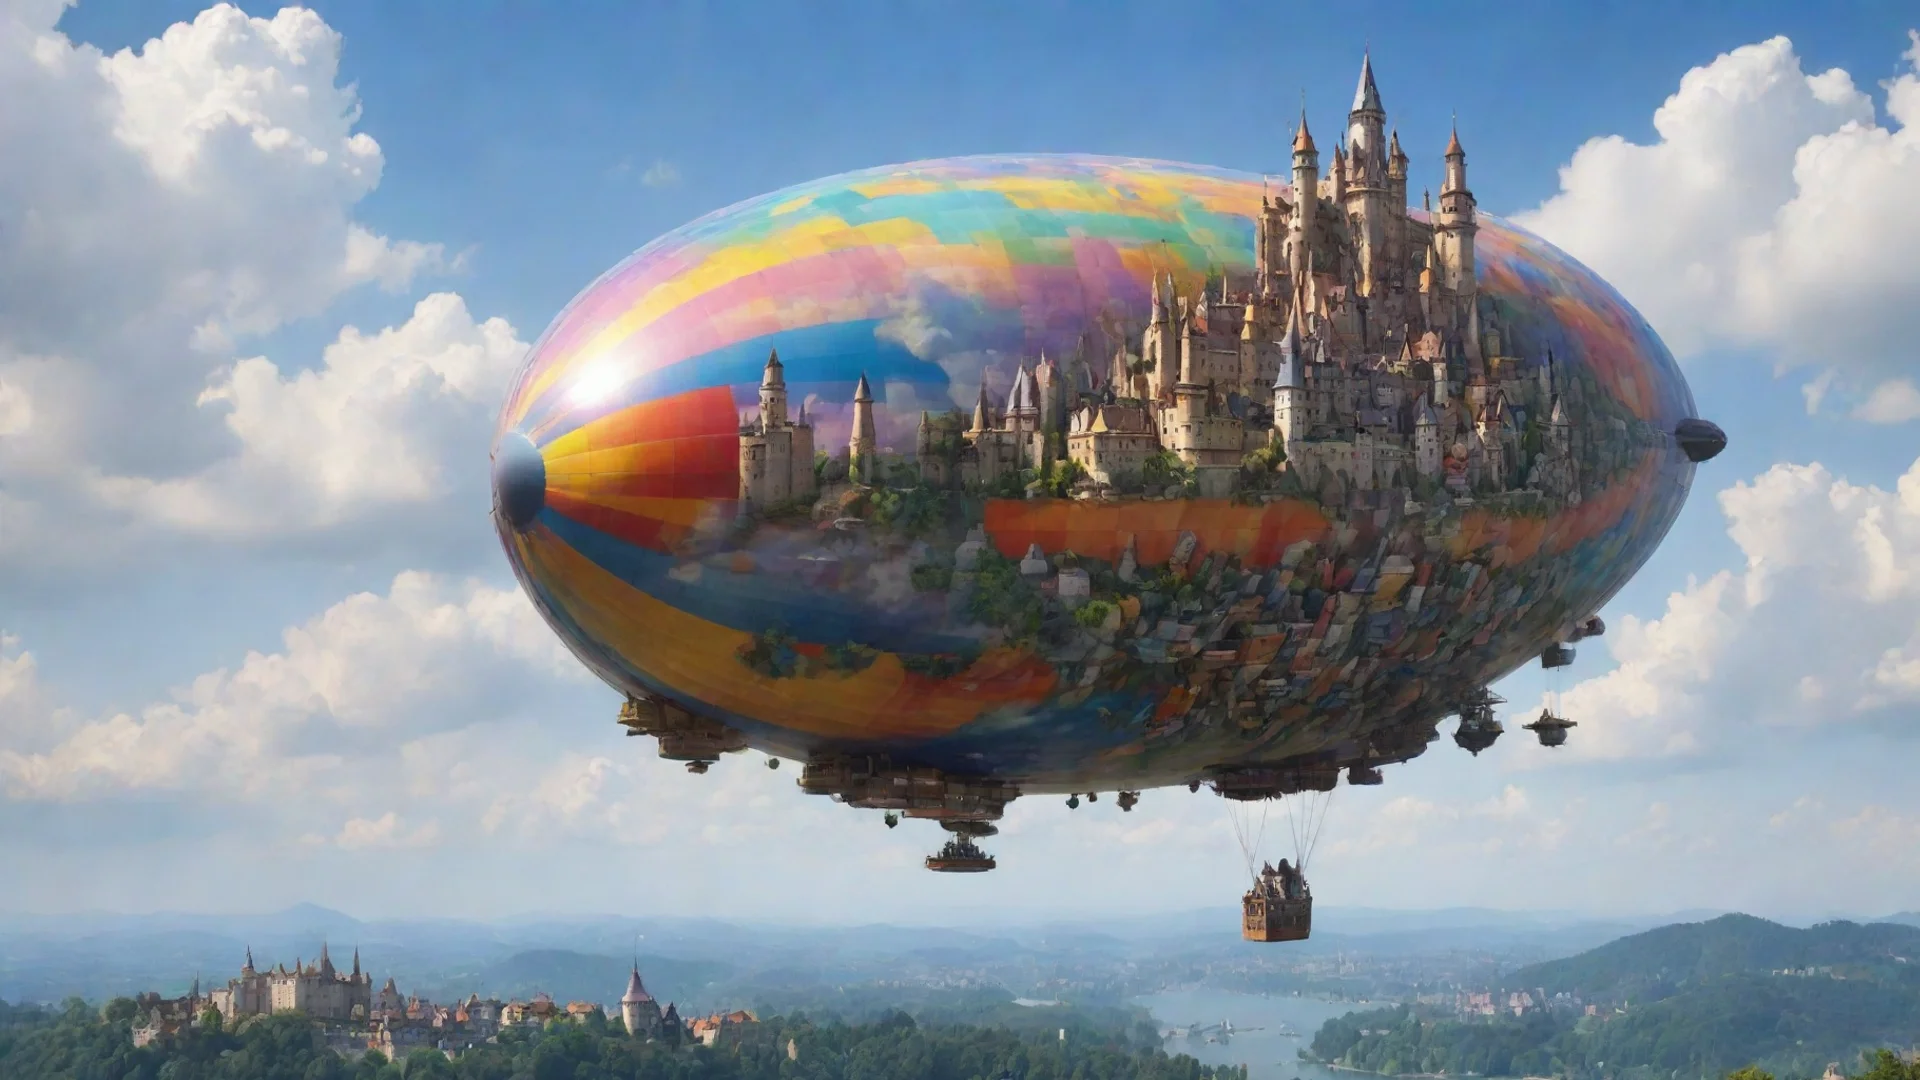 aiamazing castle in sky amazing awesome architectural masterpiece wow hd colorful world floating blimp awesome portrait 2 wide